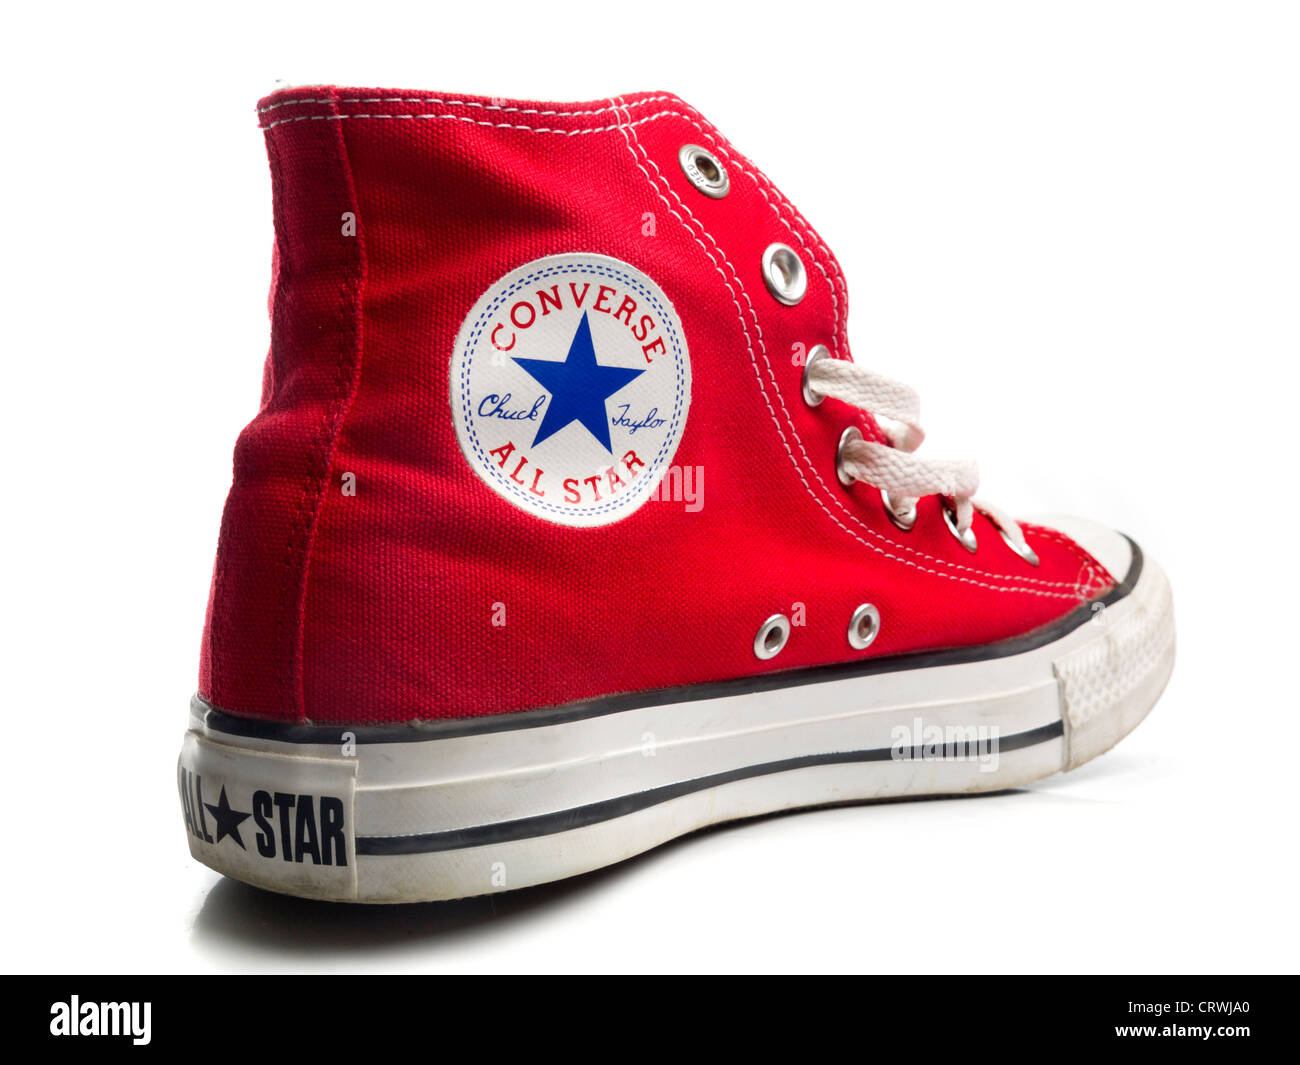 Red Converse Chuck Taylor All Star shoe Stock Photo - Alamy